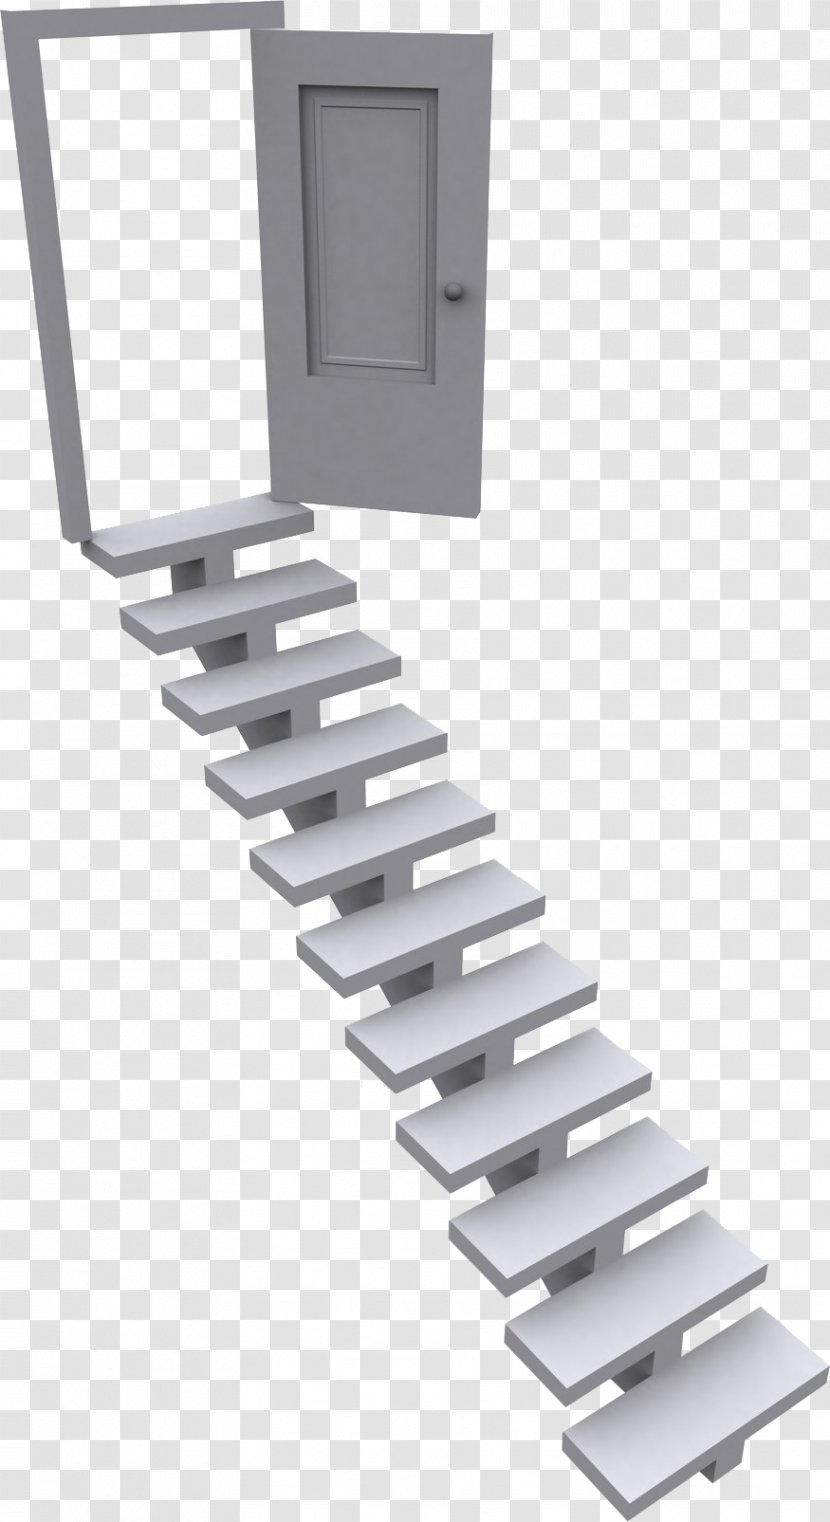 Stairs Door - Gate - Steps And Doors Transparent PNG